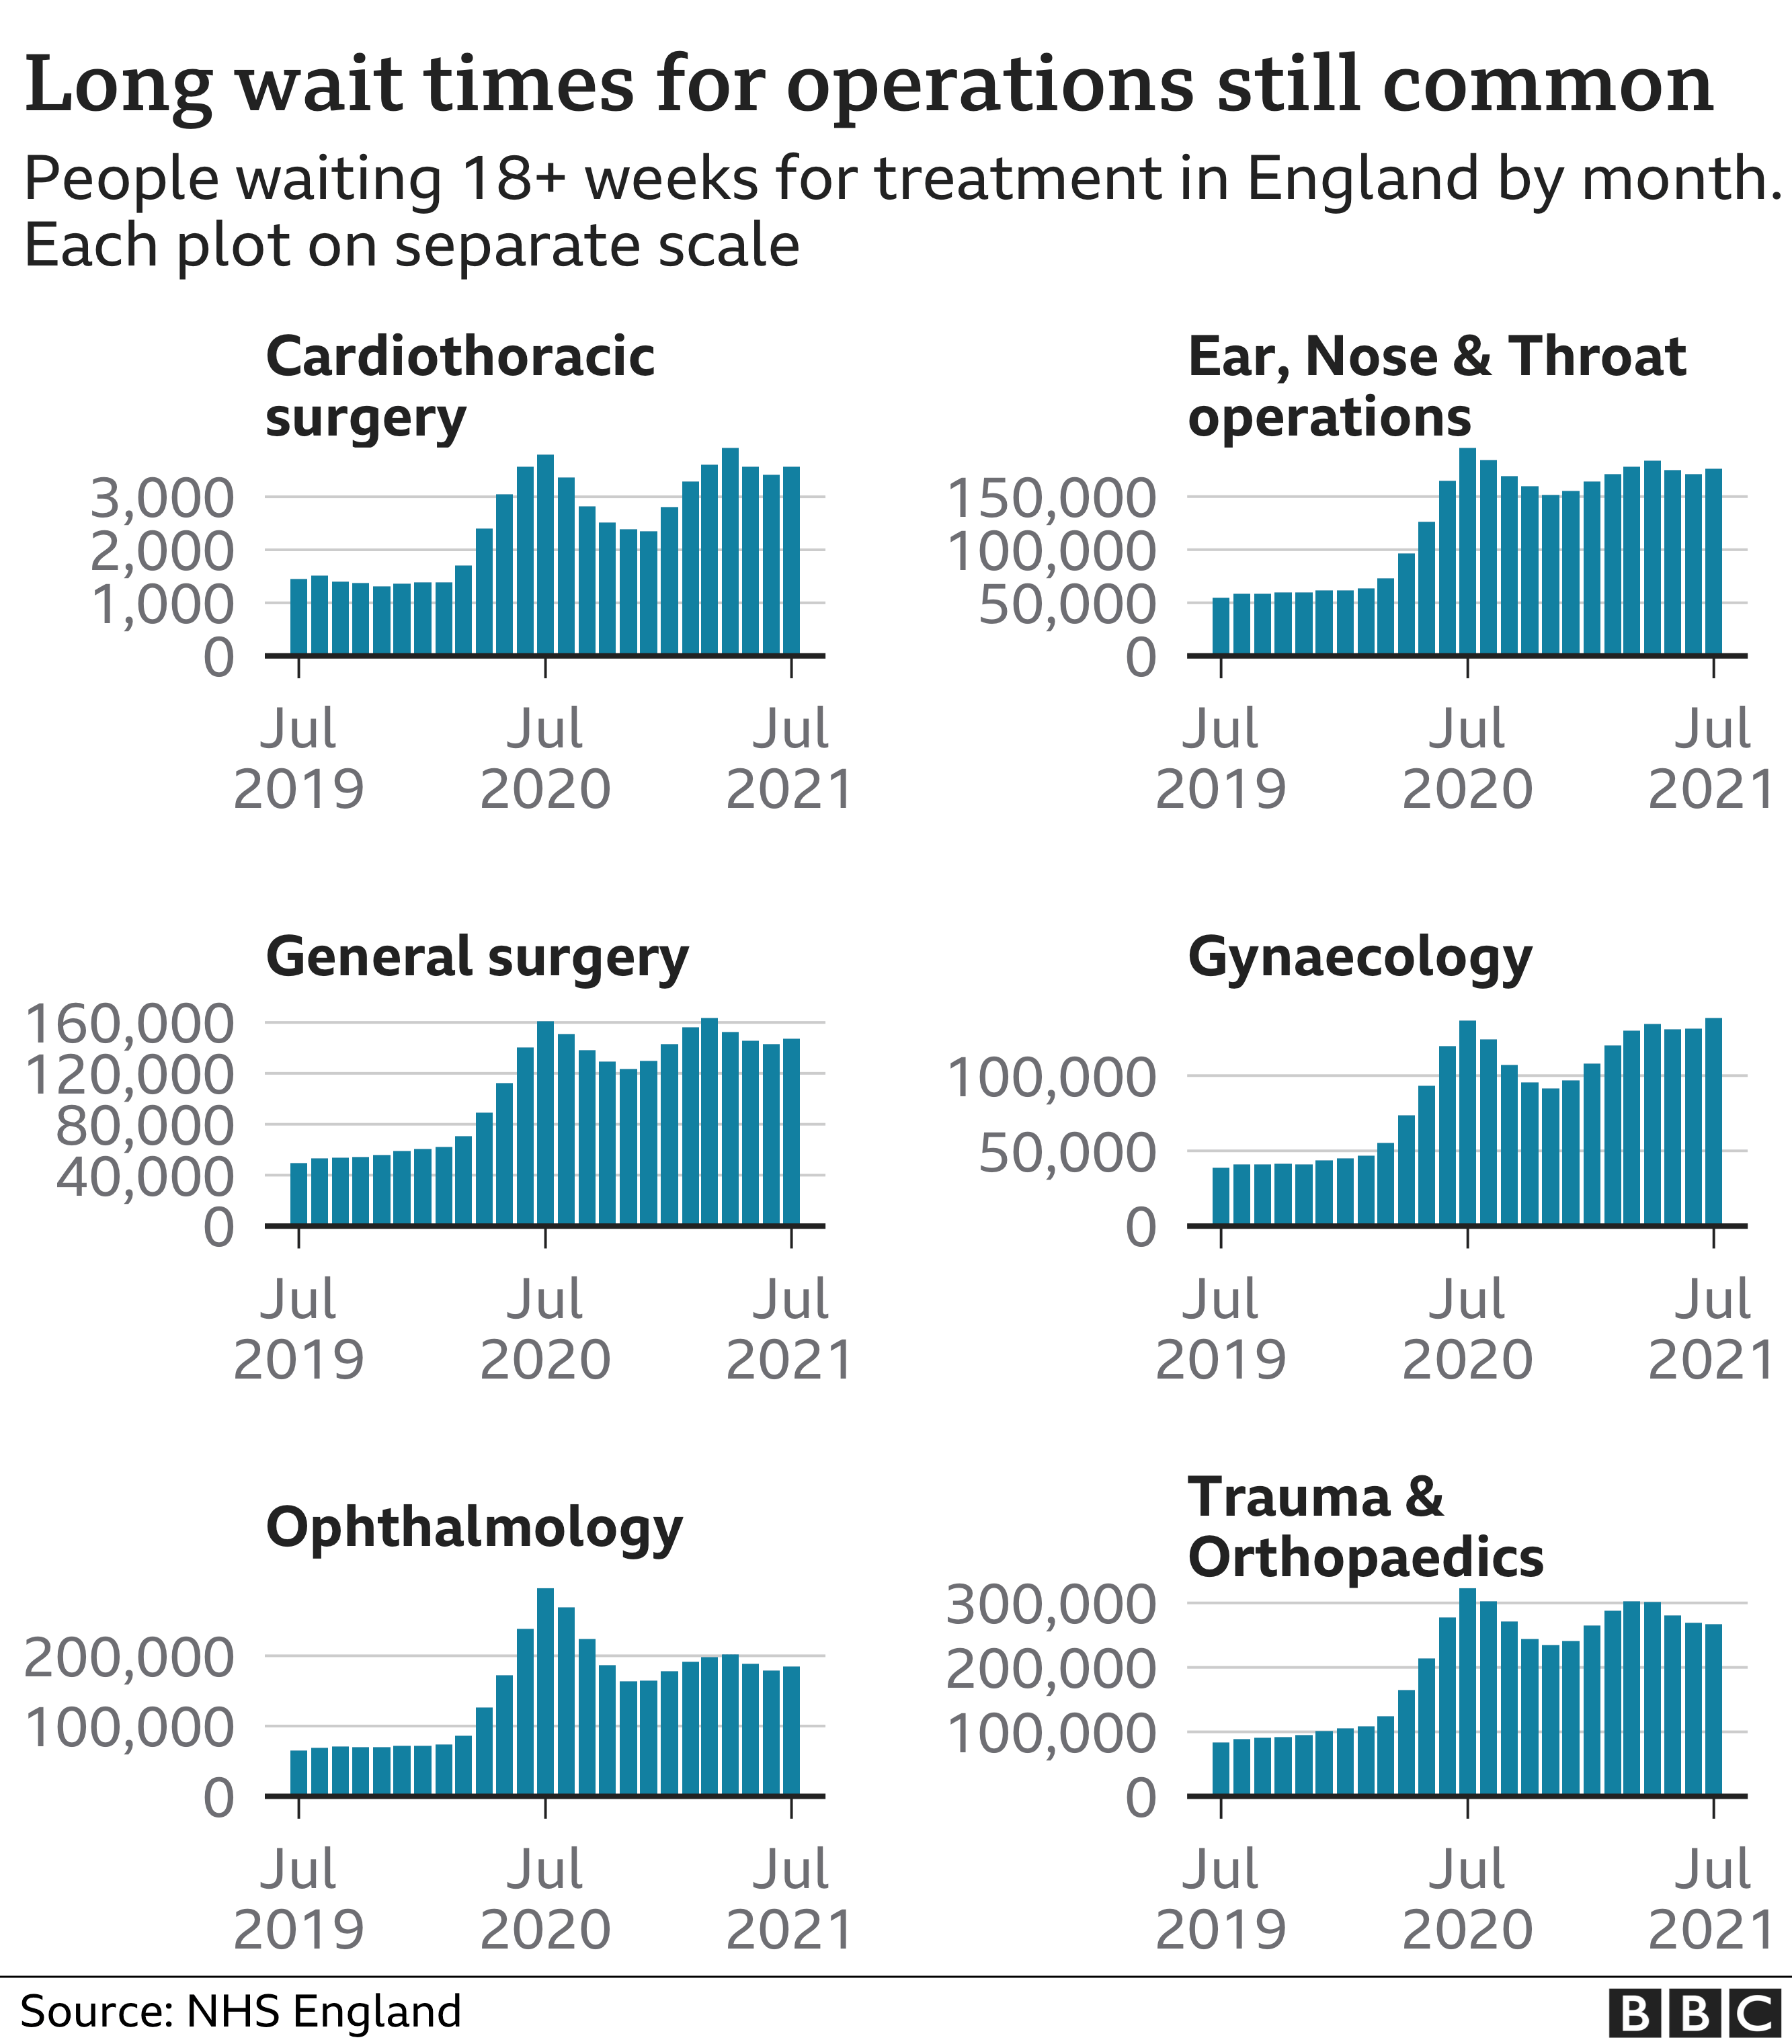 Chart showing that large numbers of people are still waiting for services